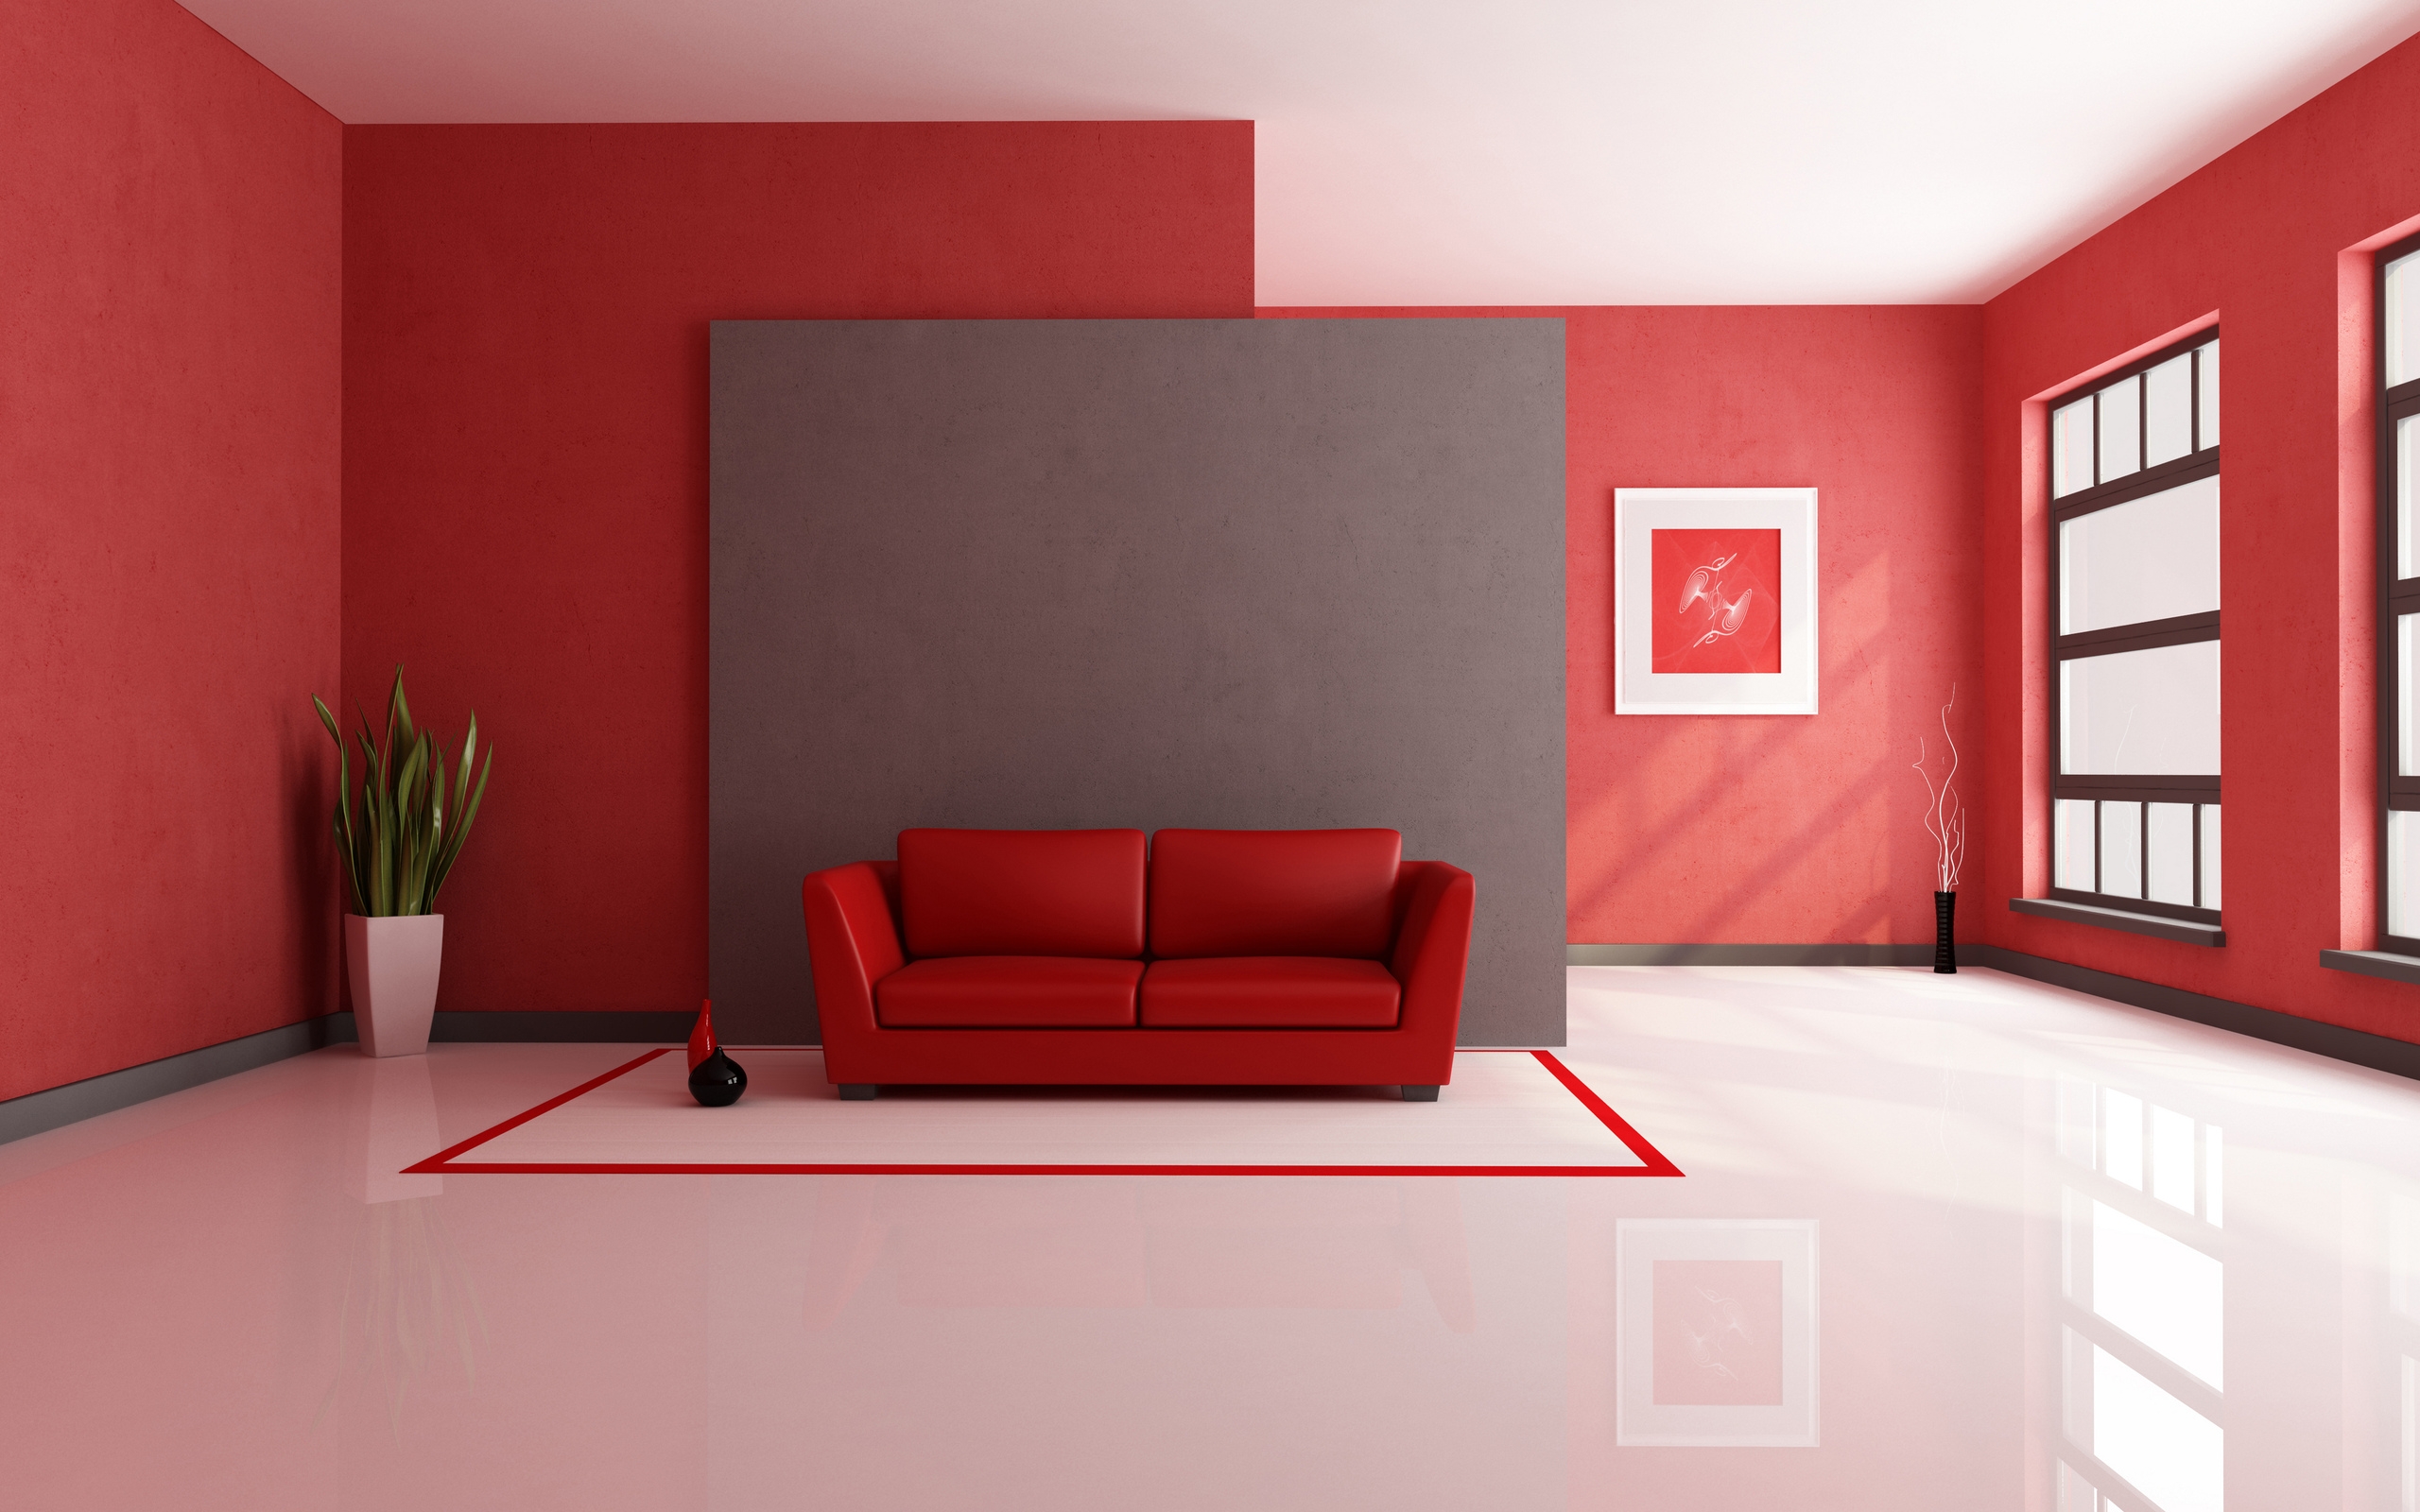 Interior Painting Design at PaintingValley.com | Explore collection of